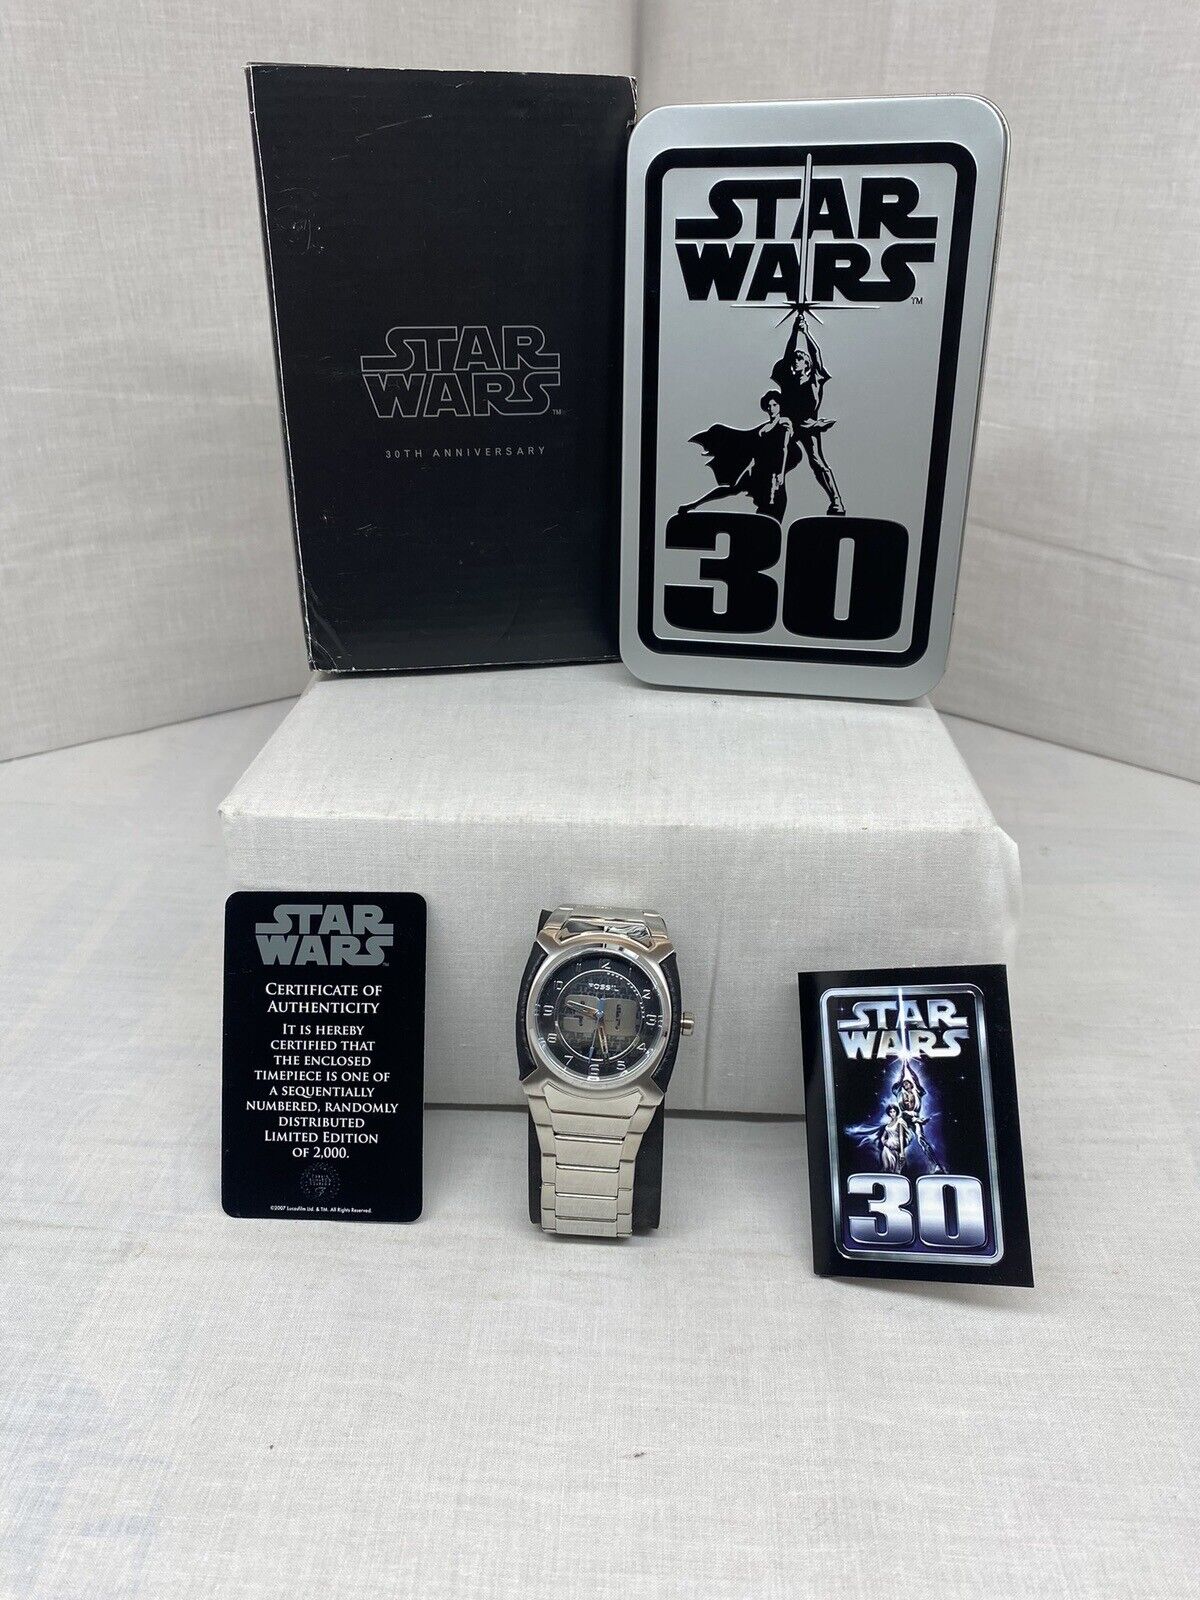 Star Wars Fossil Watch 30th Anniversary Limited Edition #531/2000.